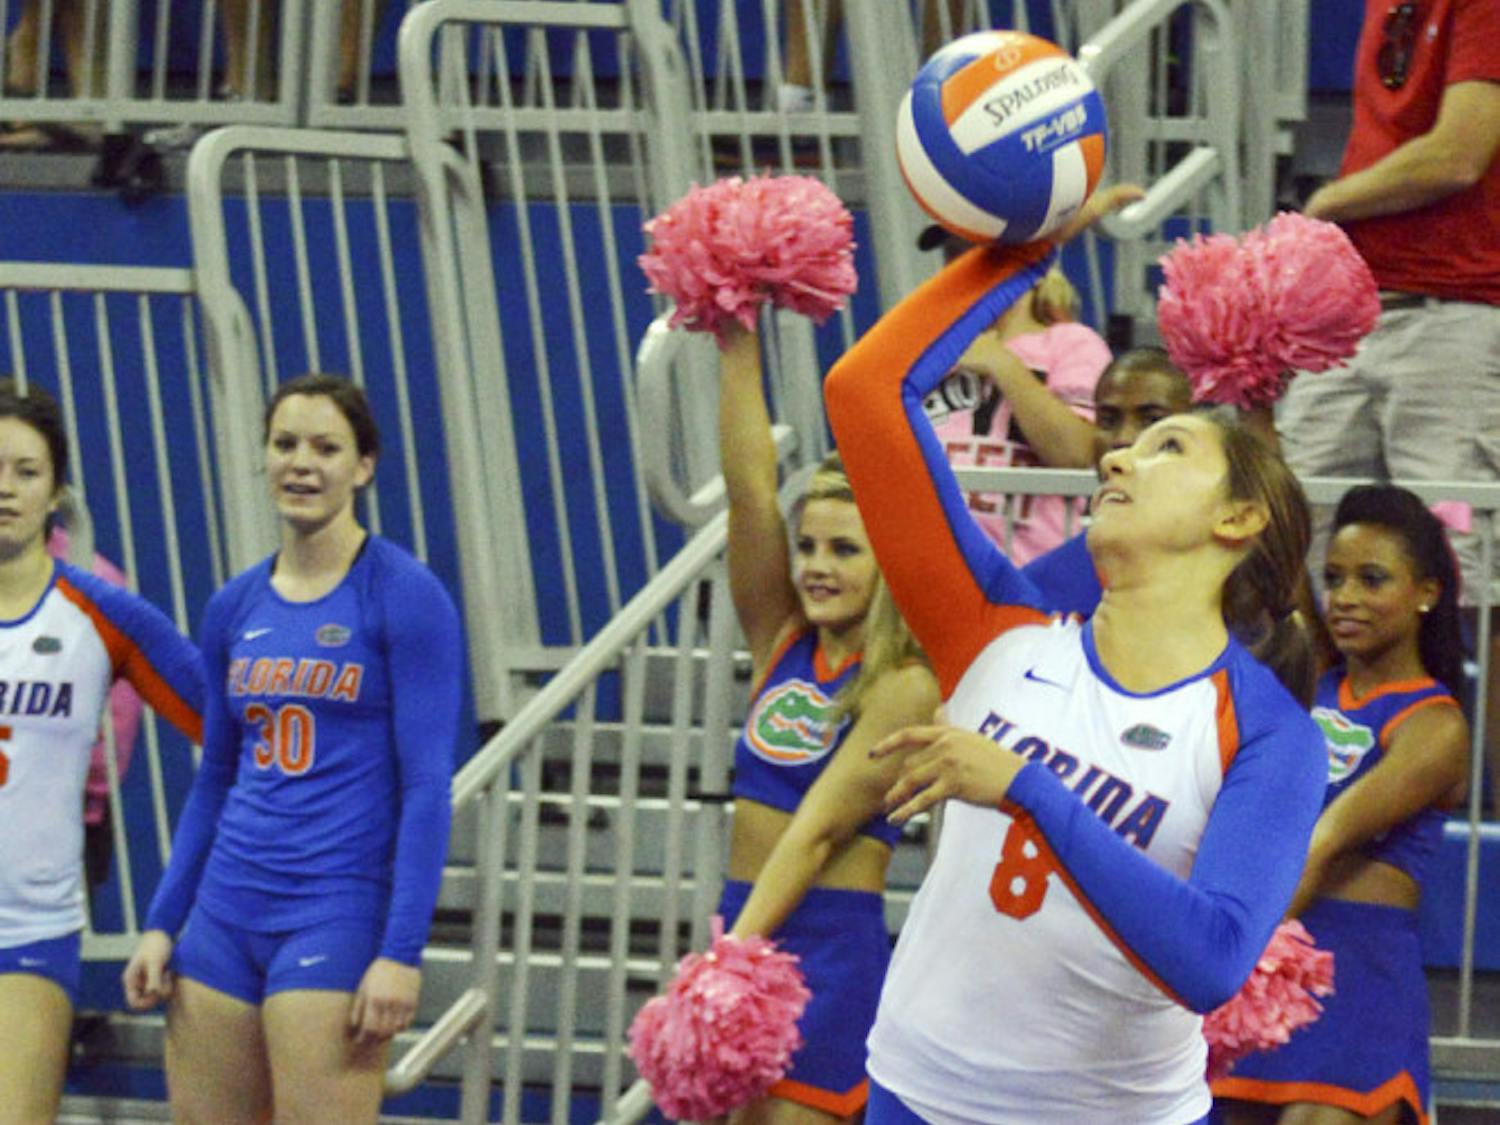 Sam Dubiel serves the ball during Florida's 3-0 win against Texas A&amp;M on Saturday in the O'Connell Center.